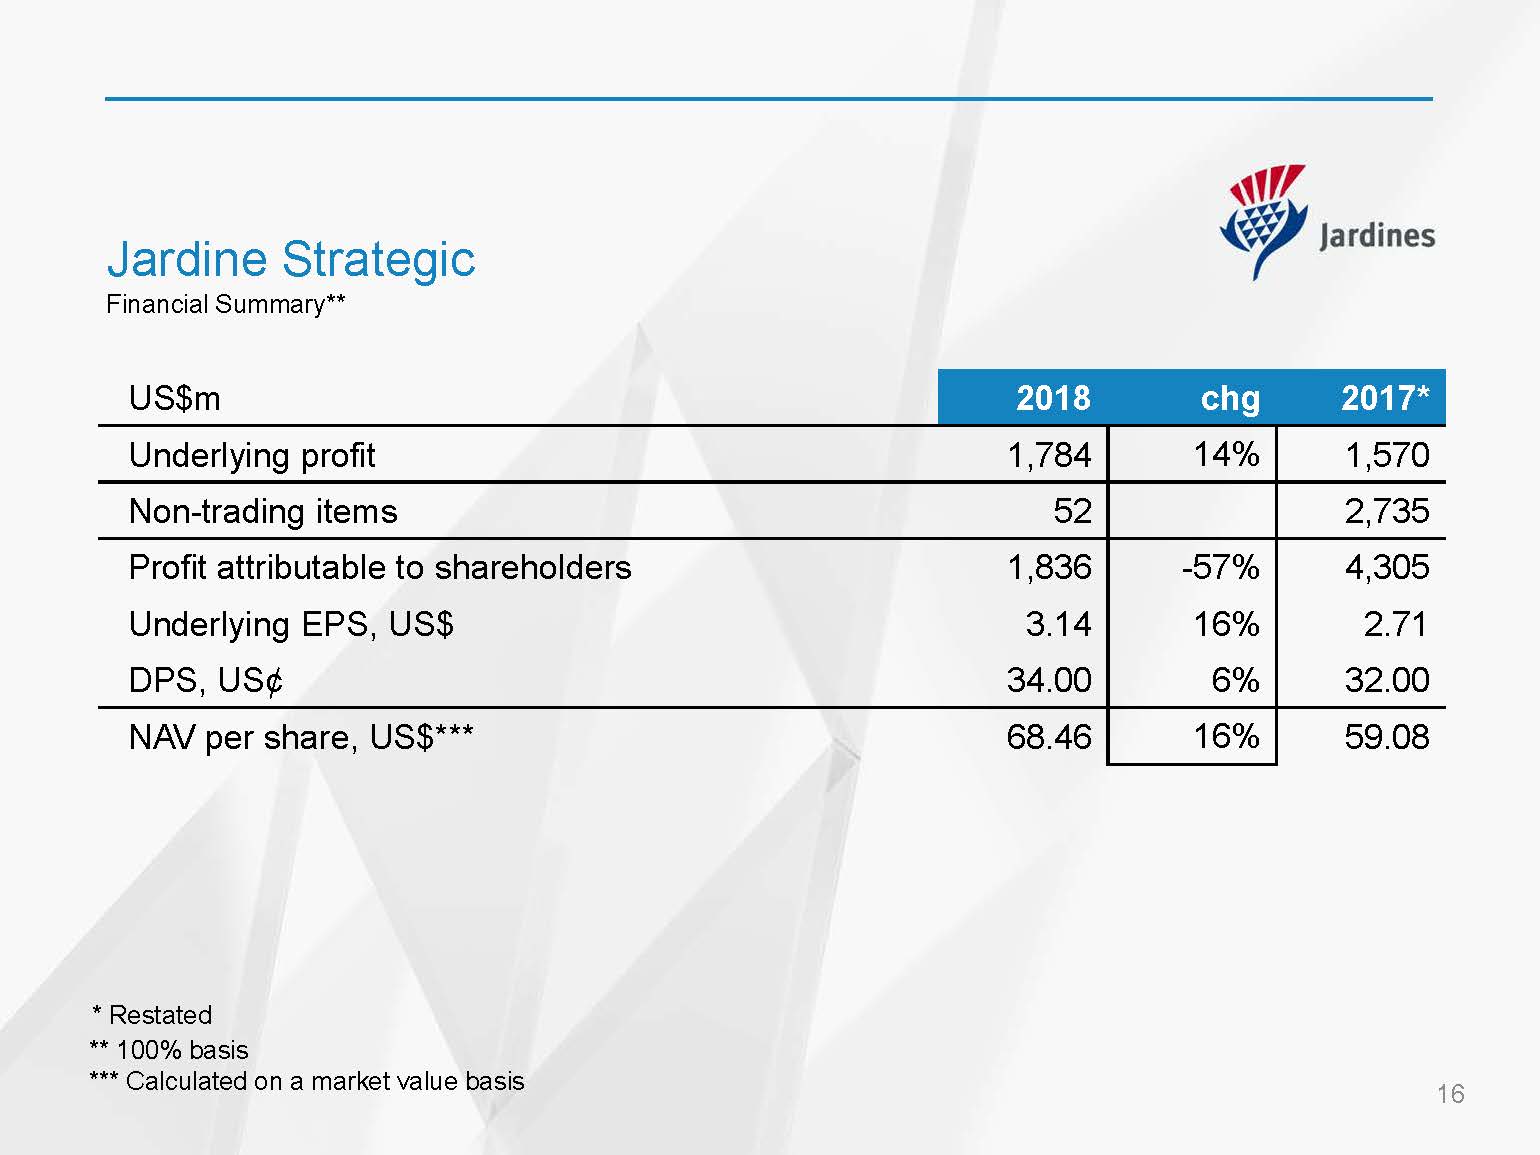 Jardine Matheson Holdings Limited - 2018 Annual Results Presentation